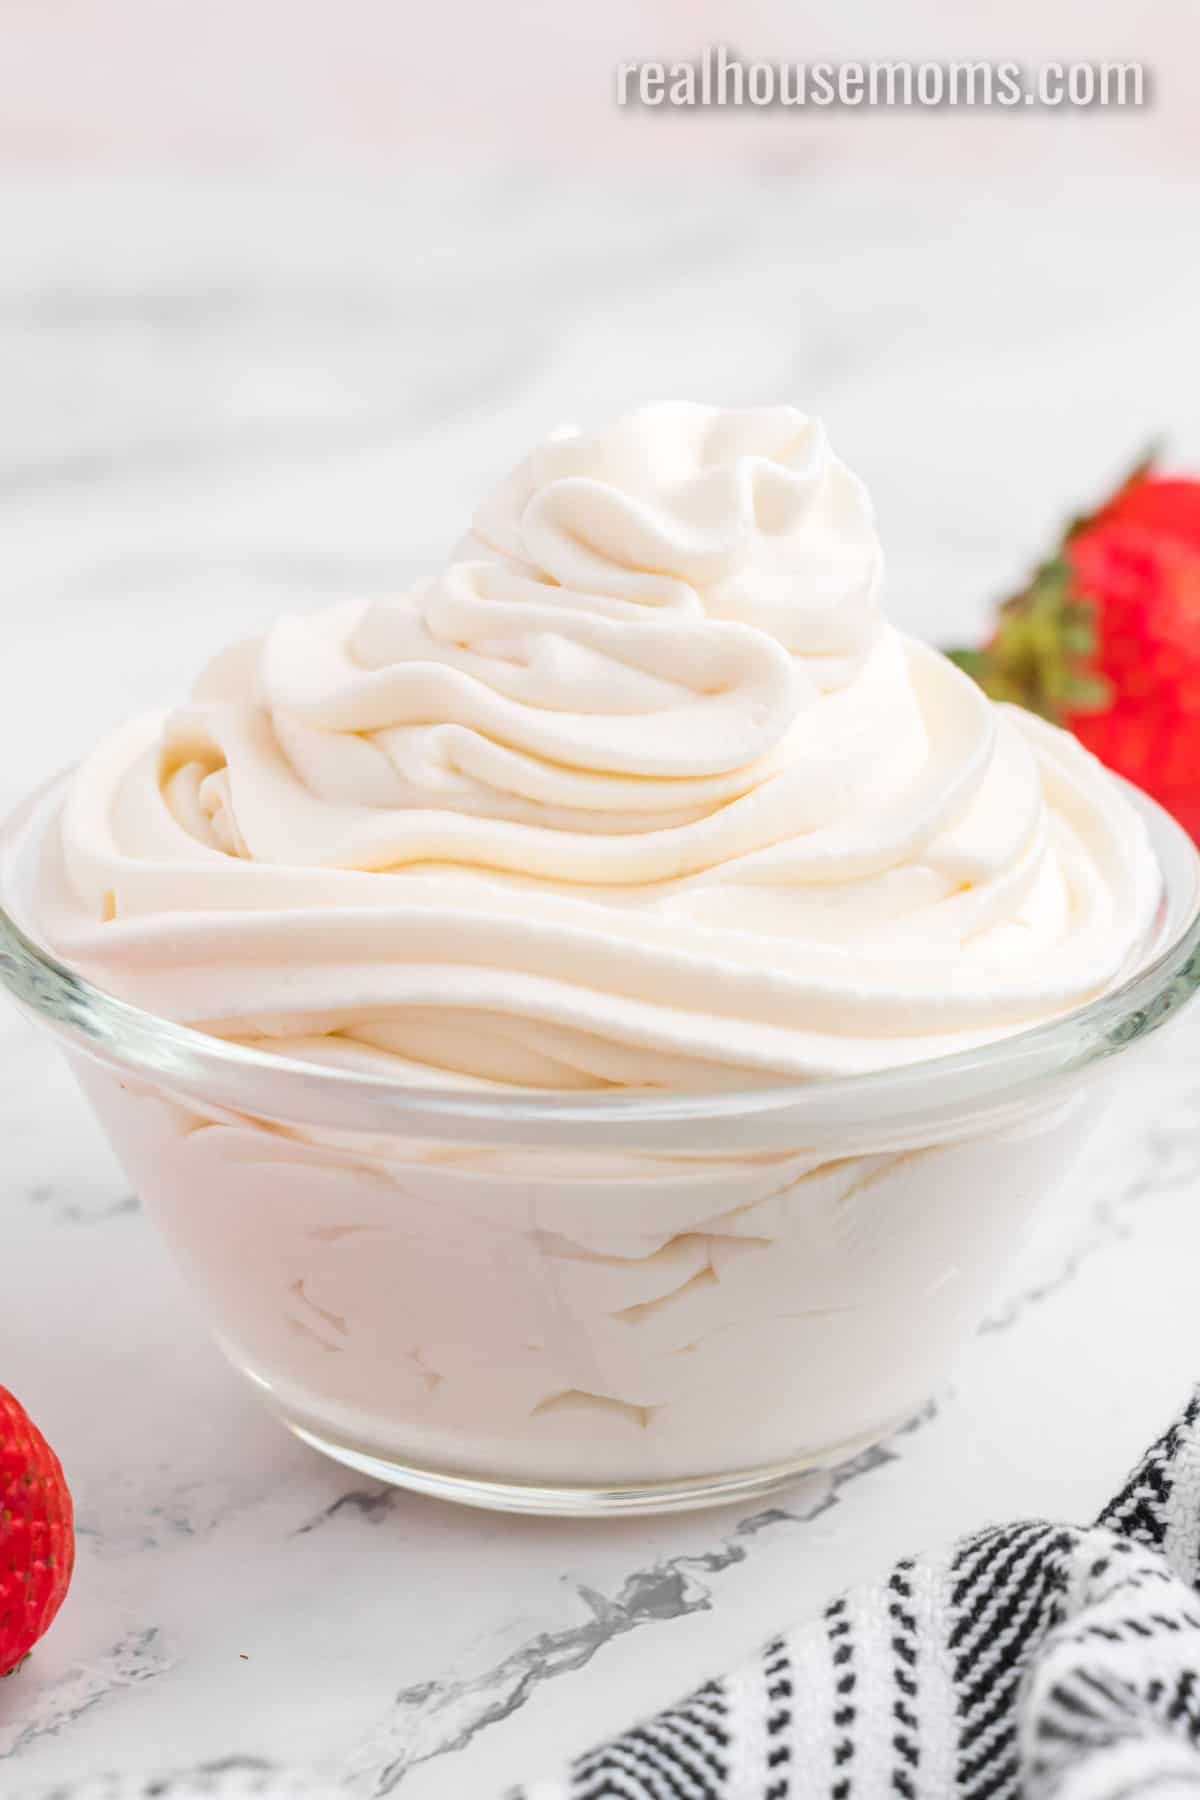 Homemade Whipped Cream - Buttered Side Up